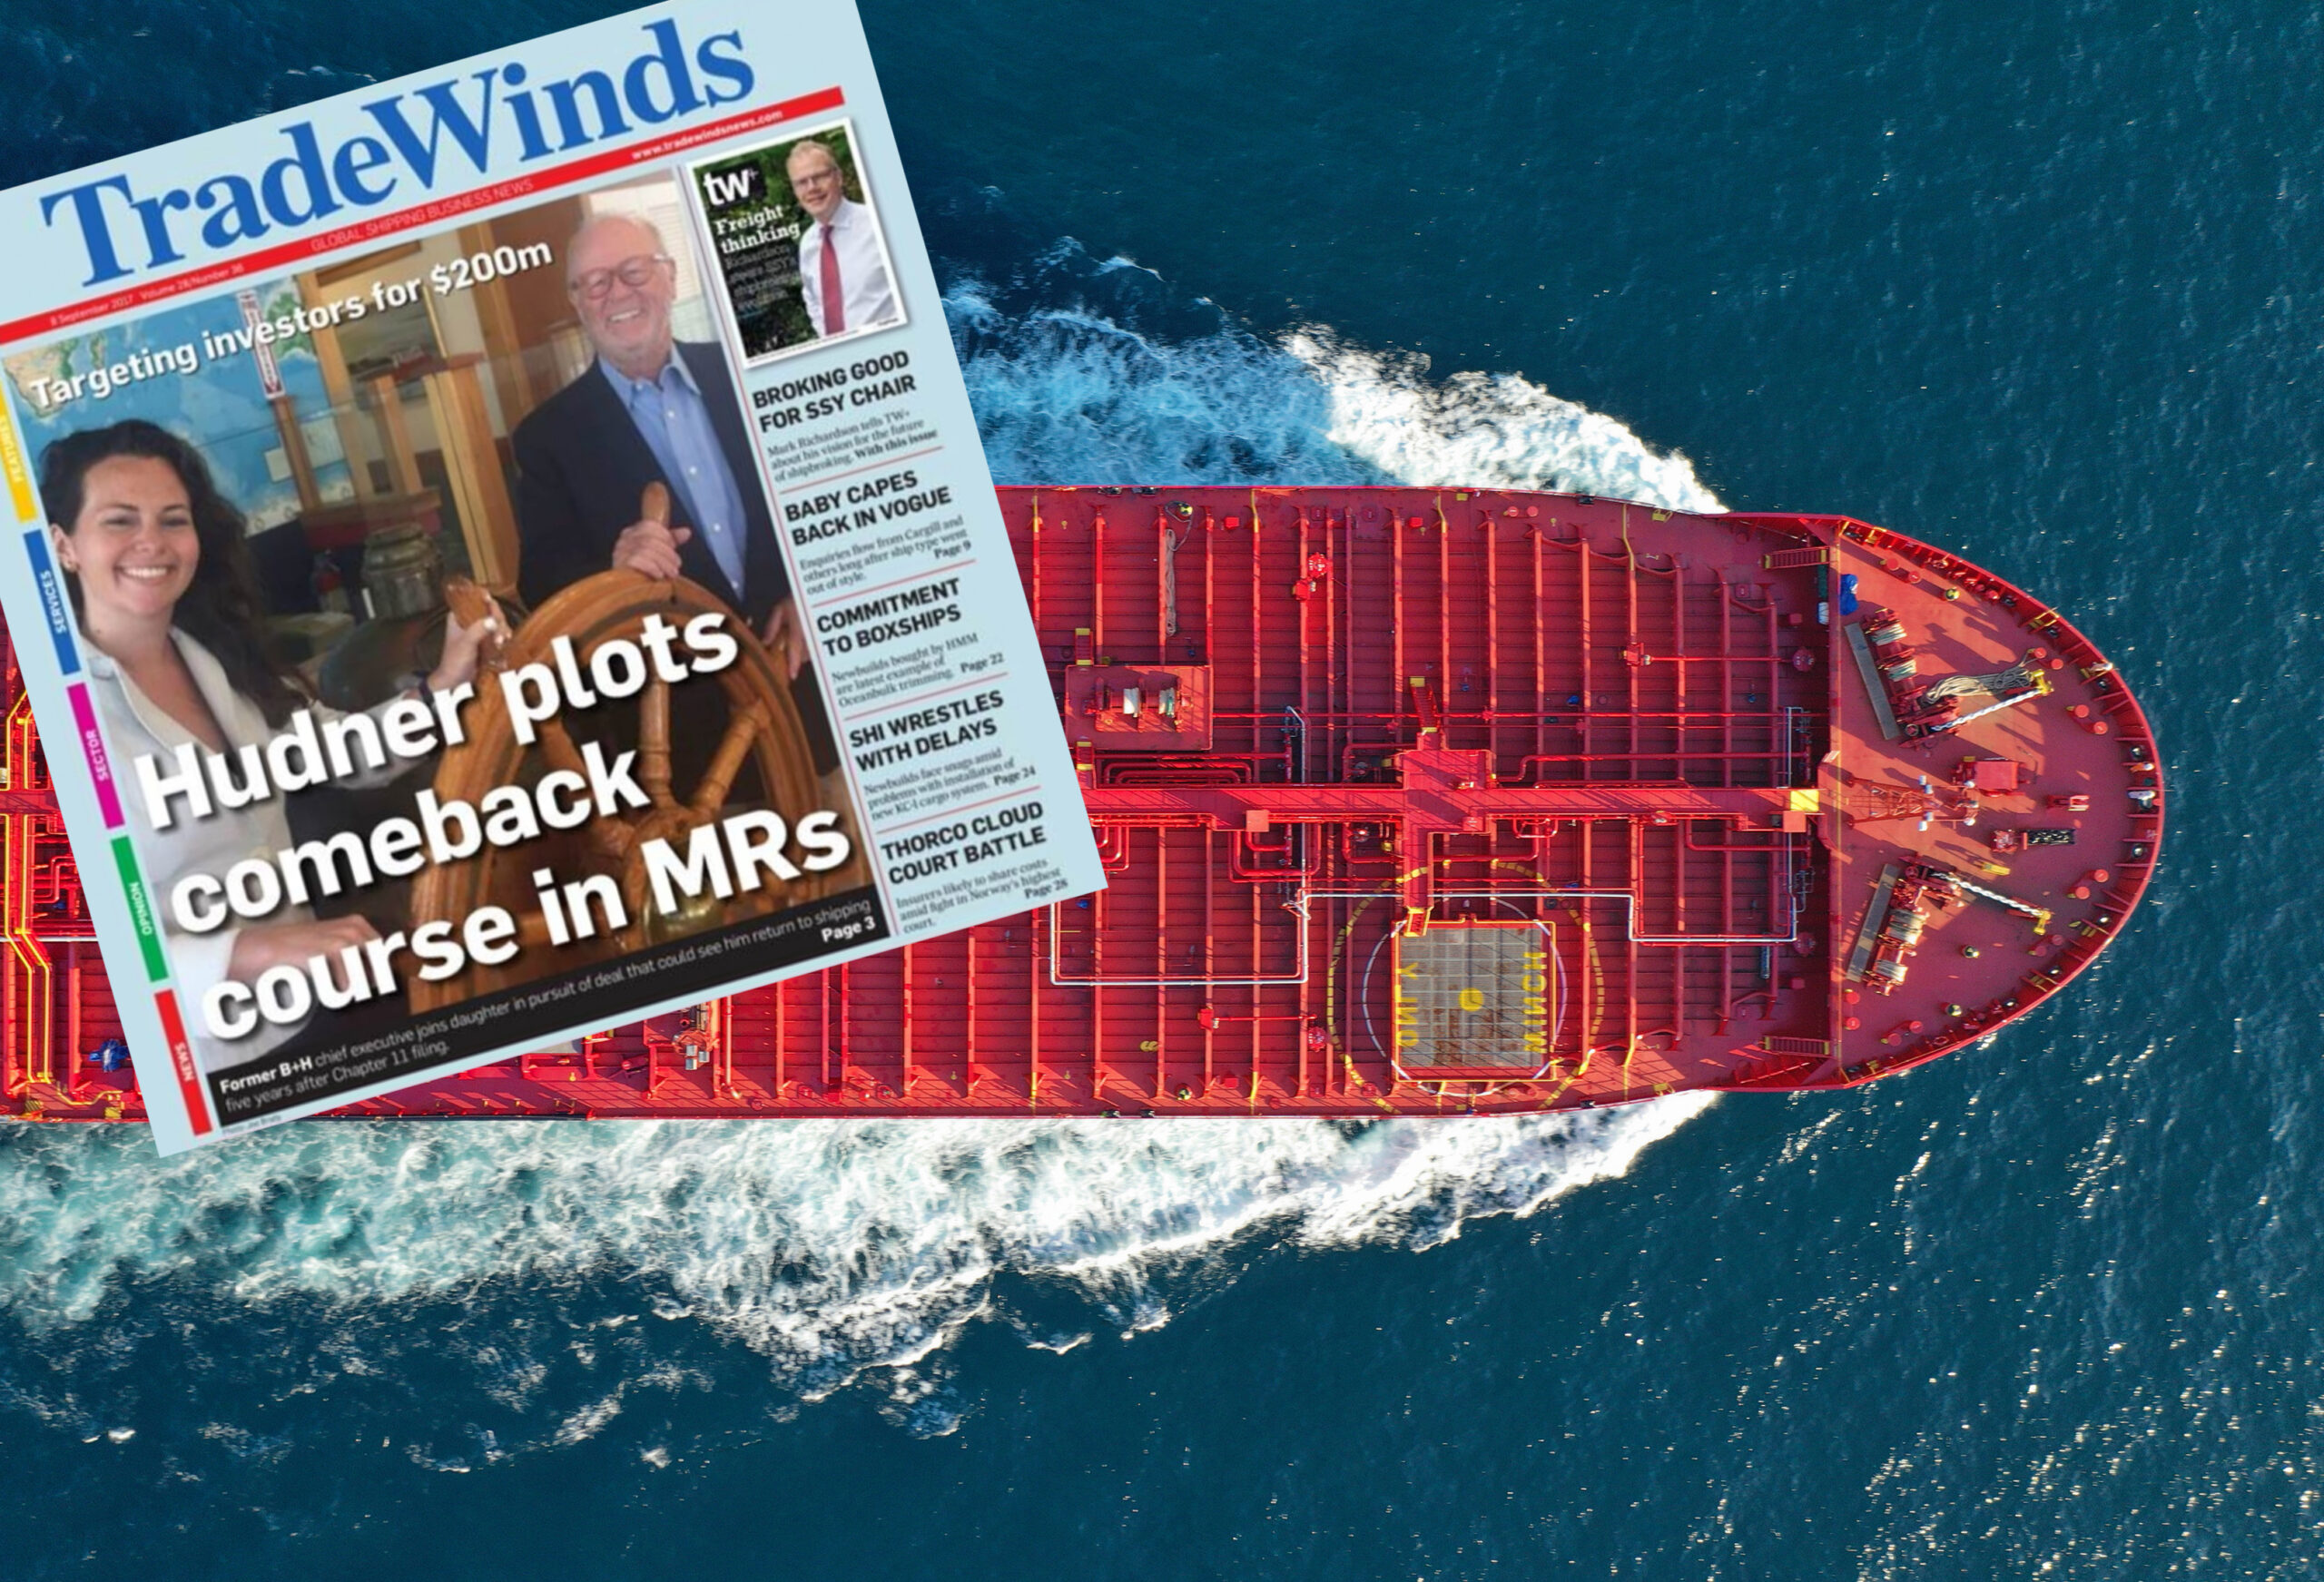 B+H Shipping's Michael Hudner on the cover of Tradewinds.